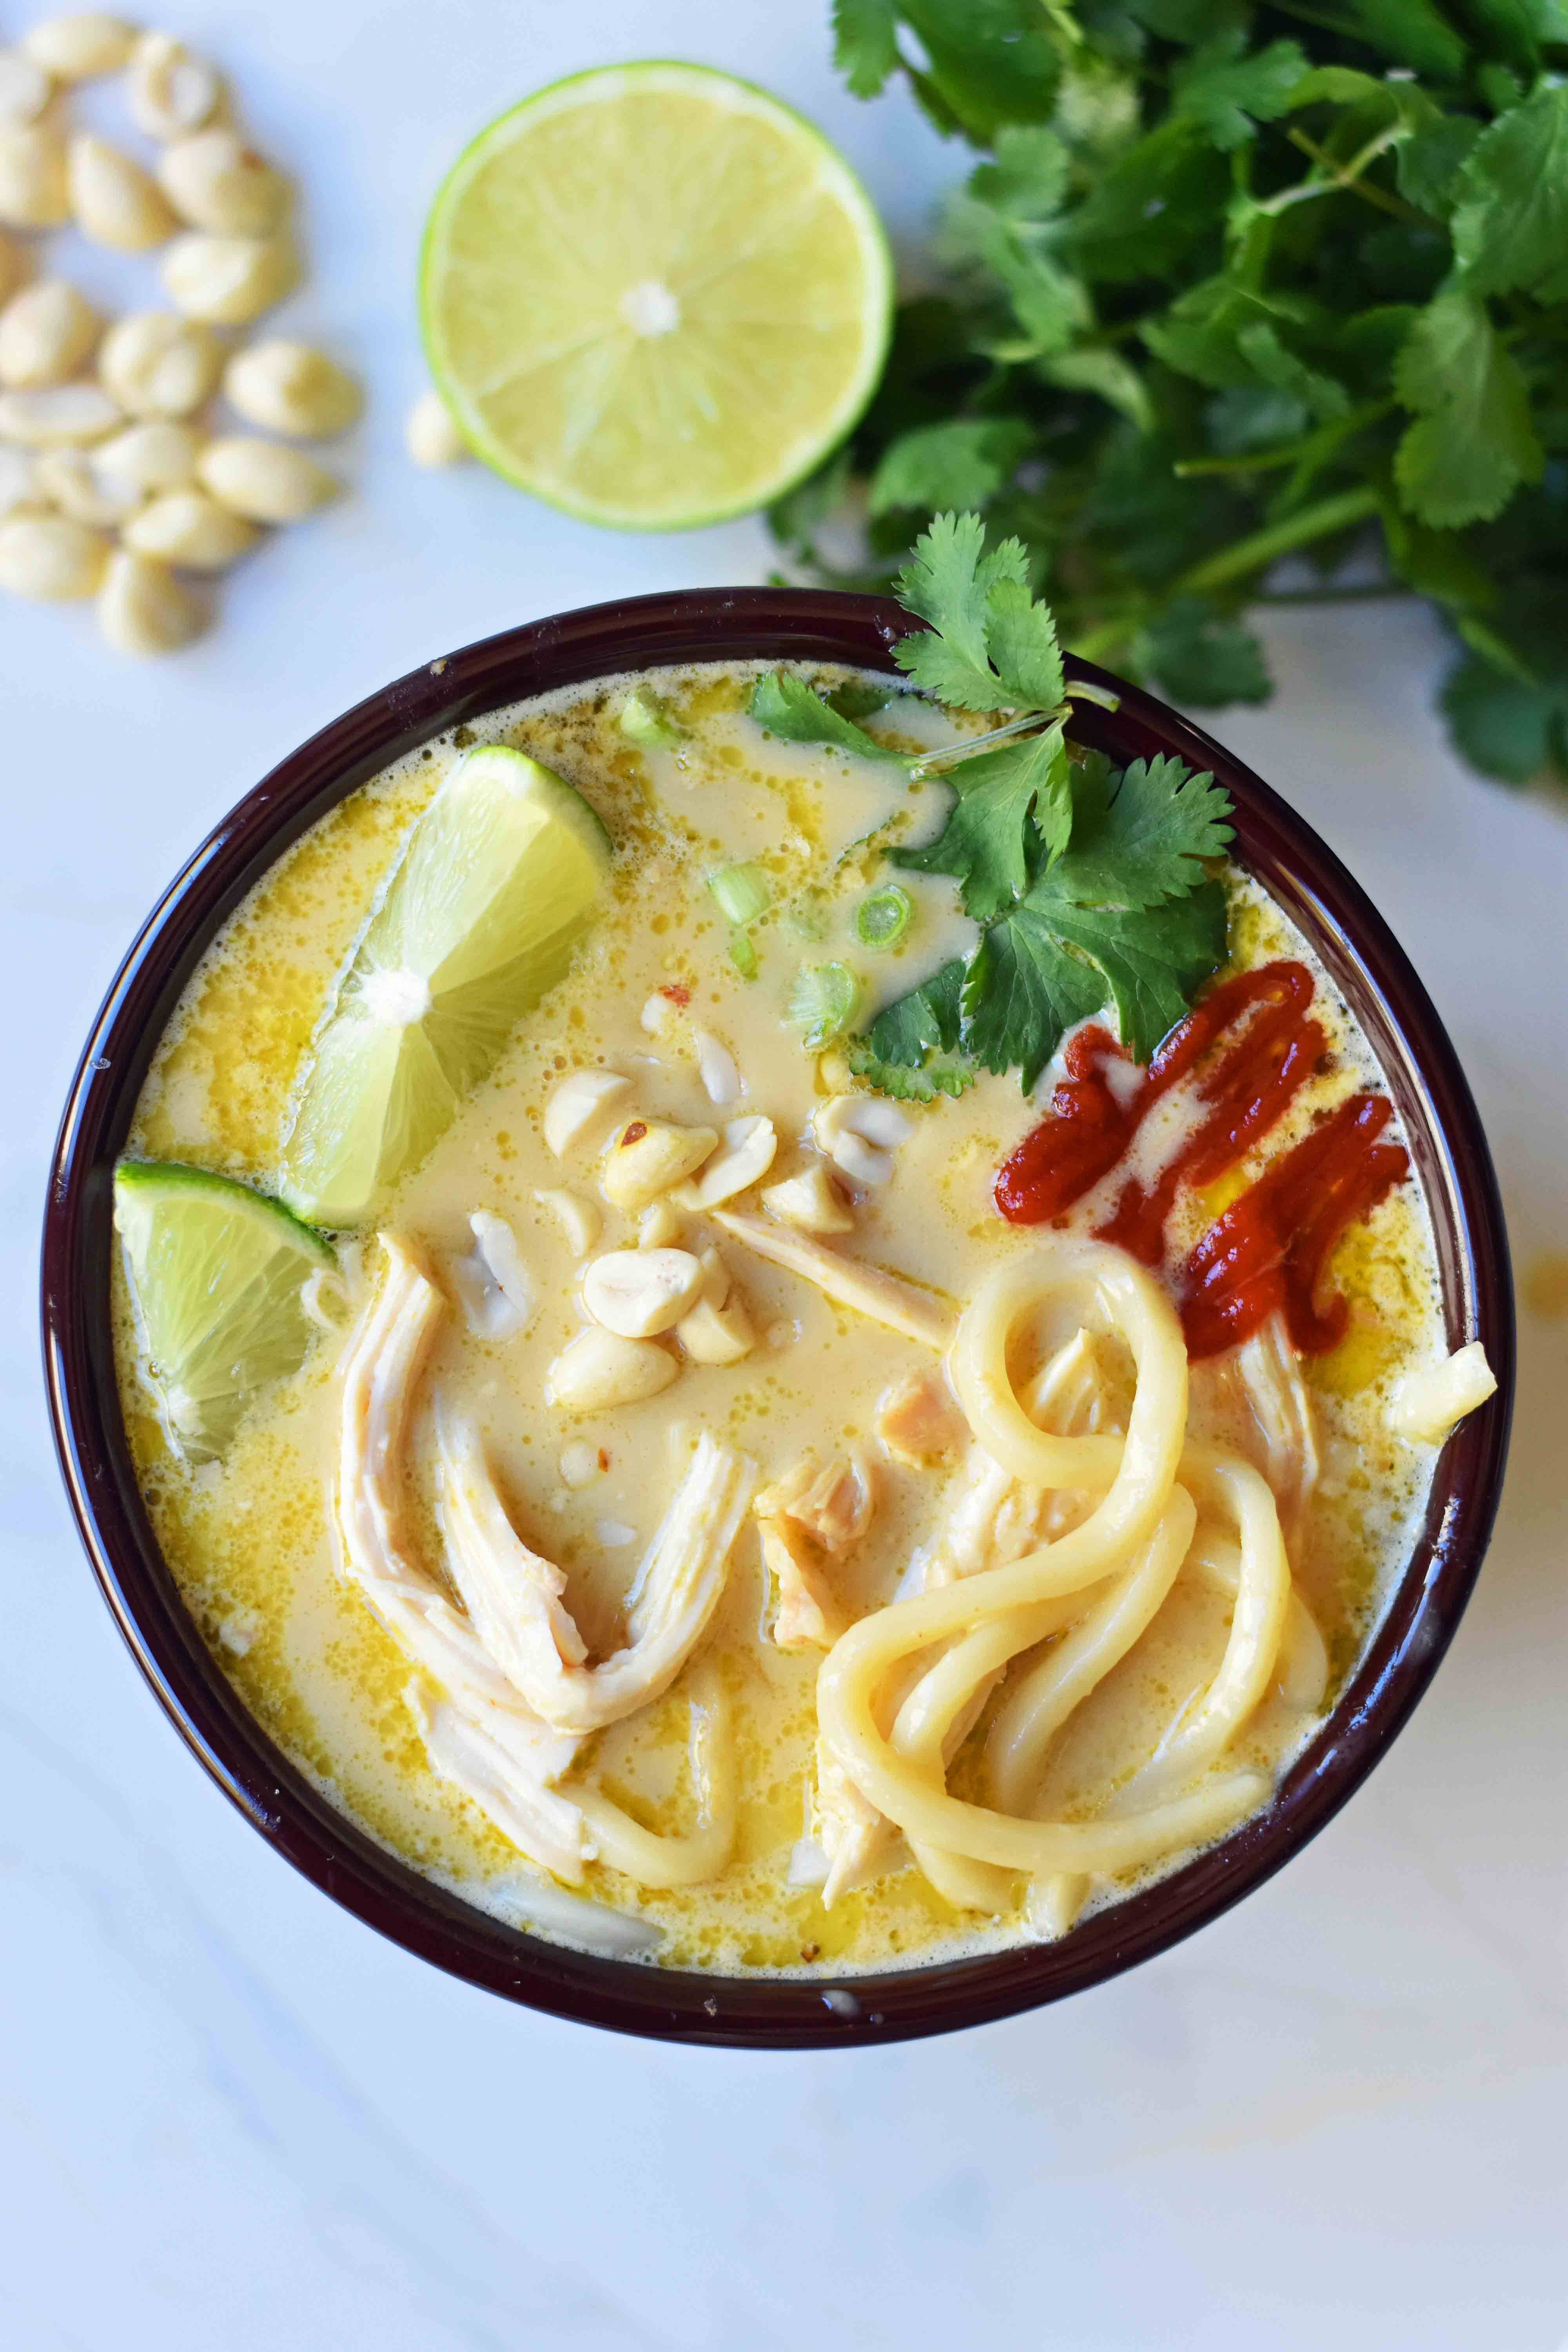 Coconut Curry Noodle Bowls. These Thai Curry Noodles are gluten-free and dairy-free and made in less than 30 minutes. A quick and easy 30-minute meal which is full of flavor. www.modernhoney.com